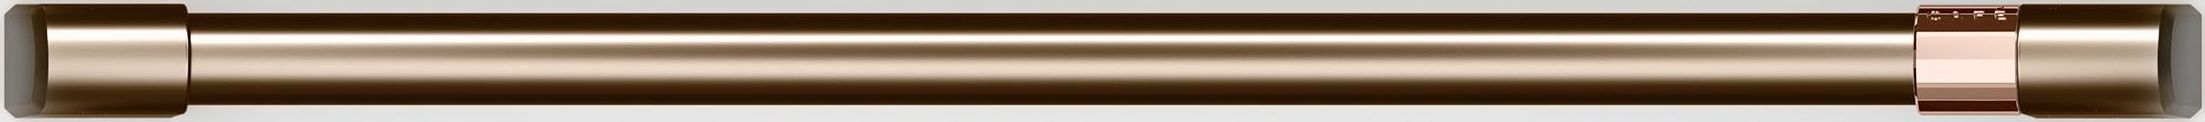 Café™ Brushed Bronze Single Wall Oven Handle